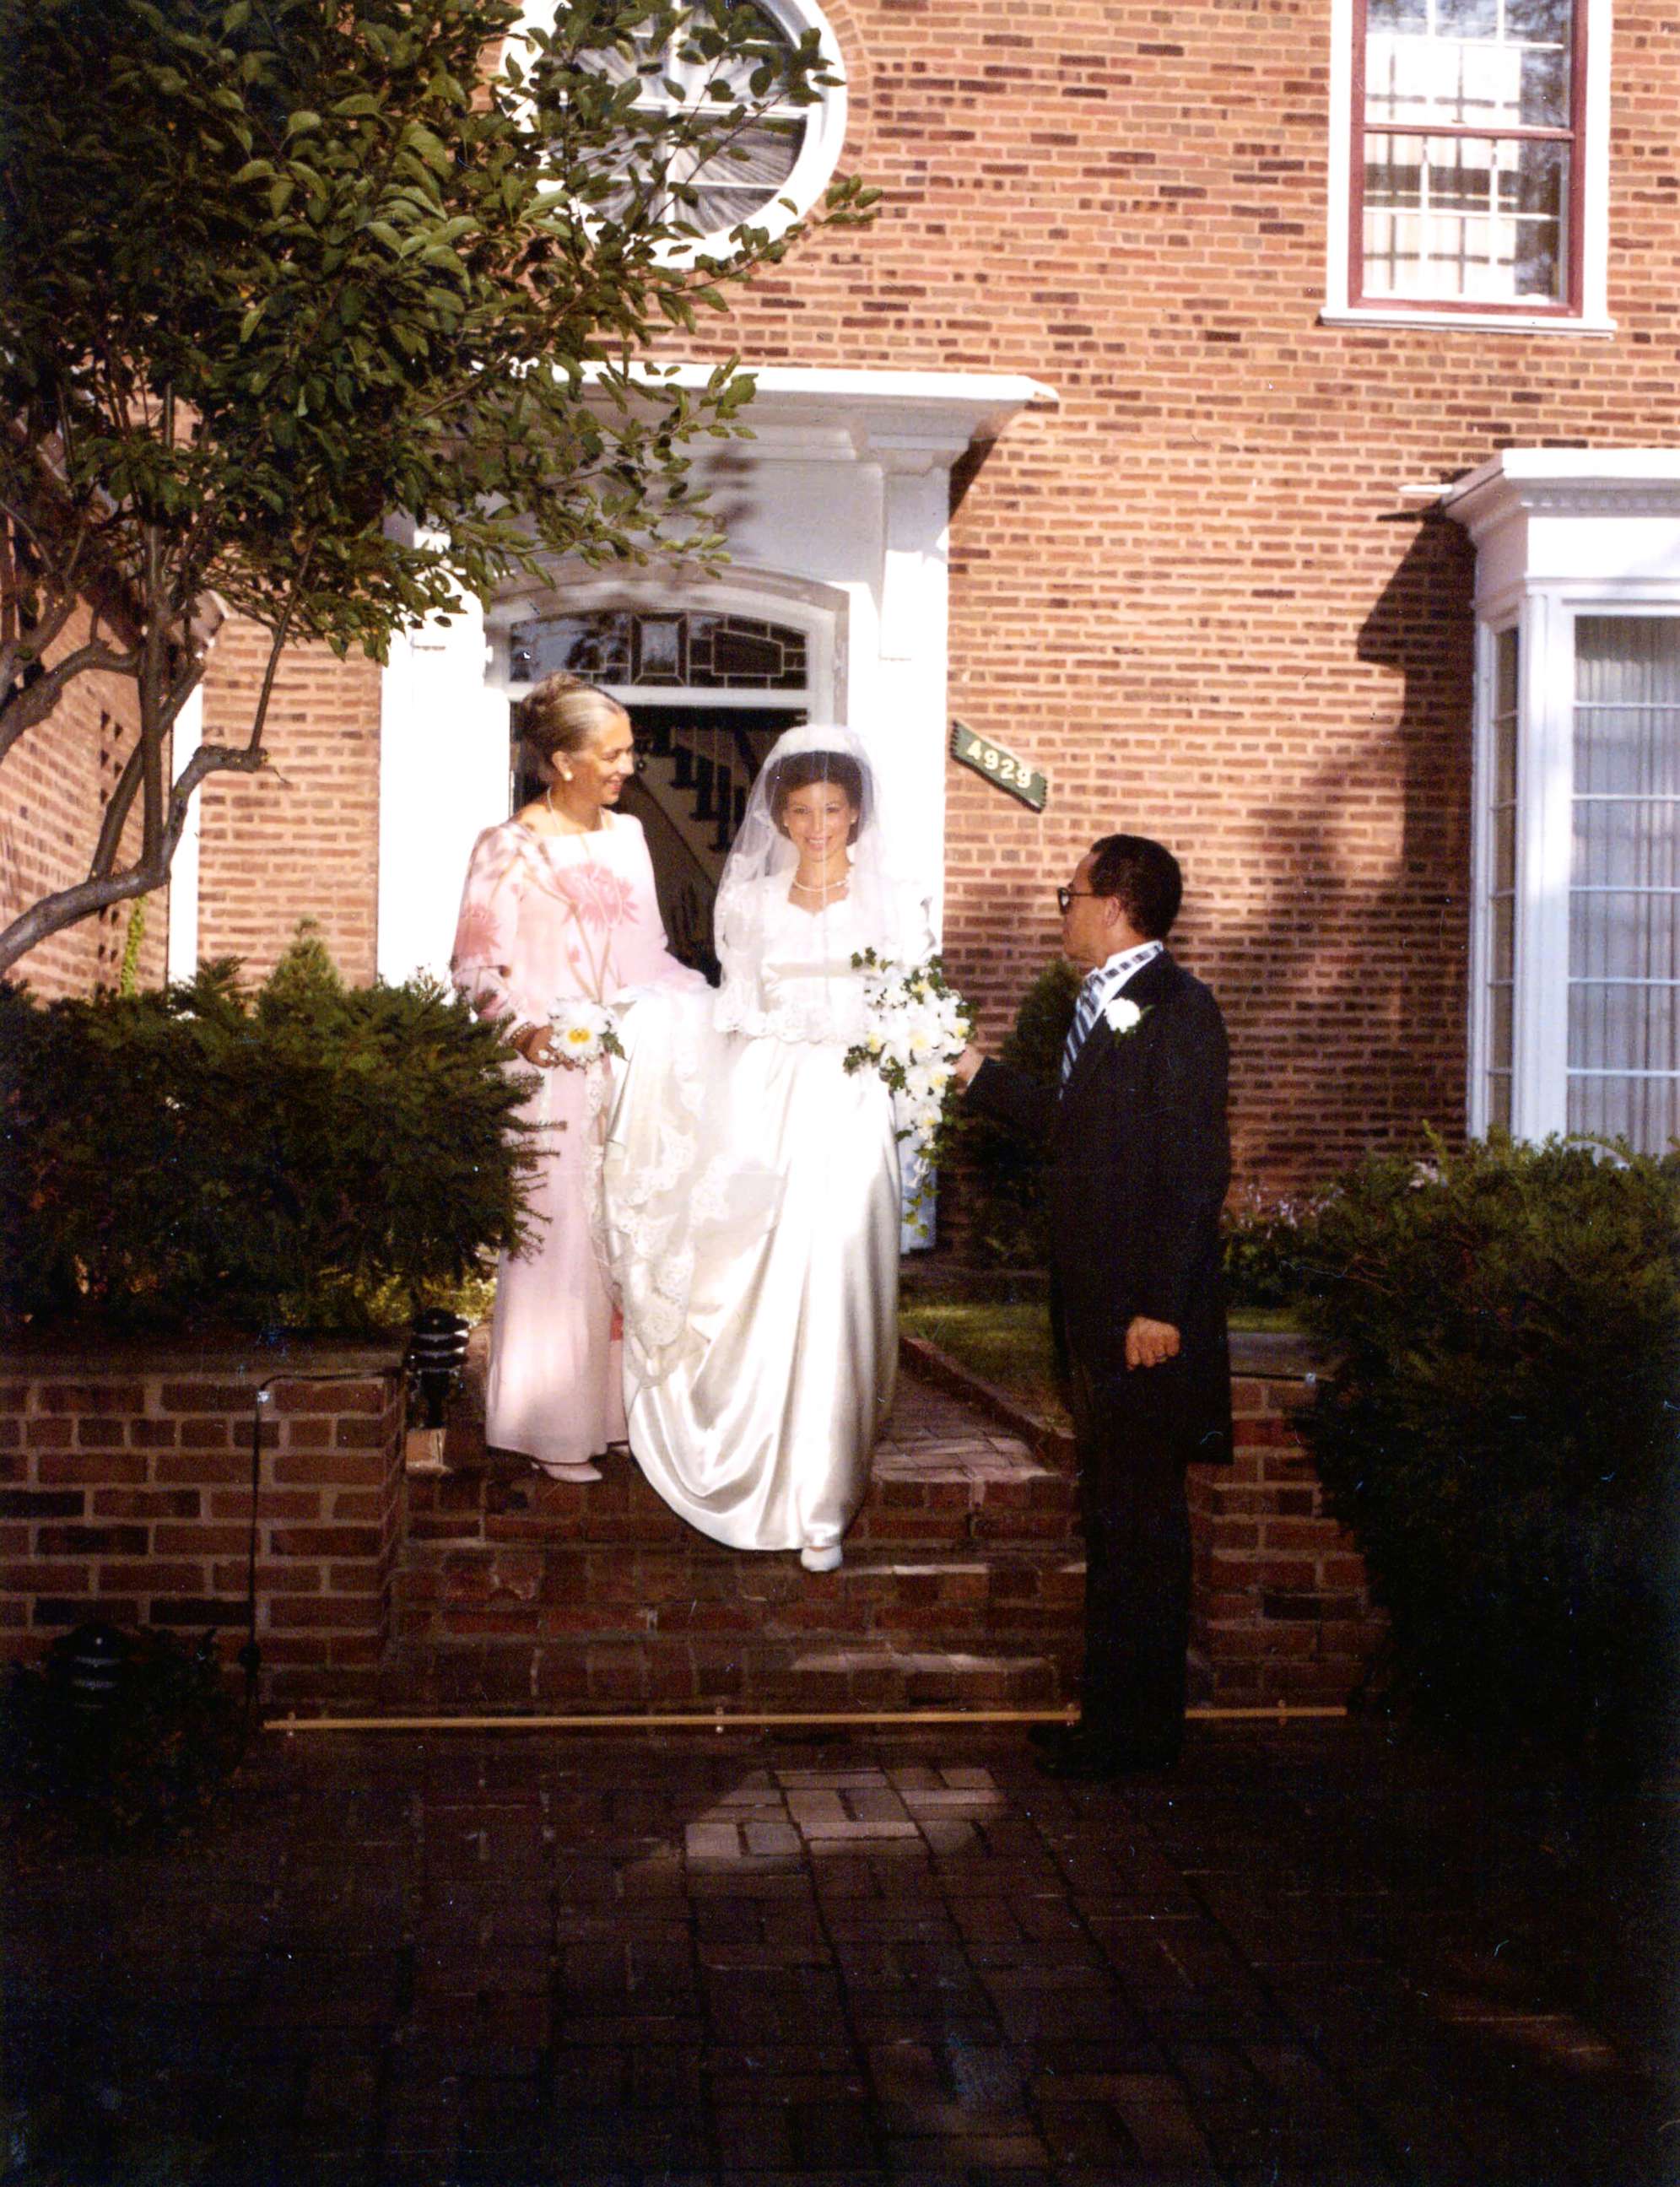 PHOTO: Valerie Jarrett with her parents on her wedding day in 1983.